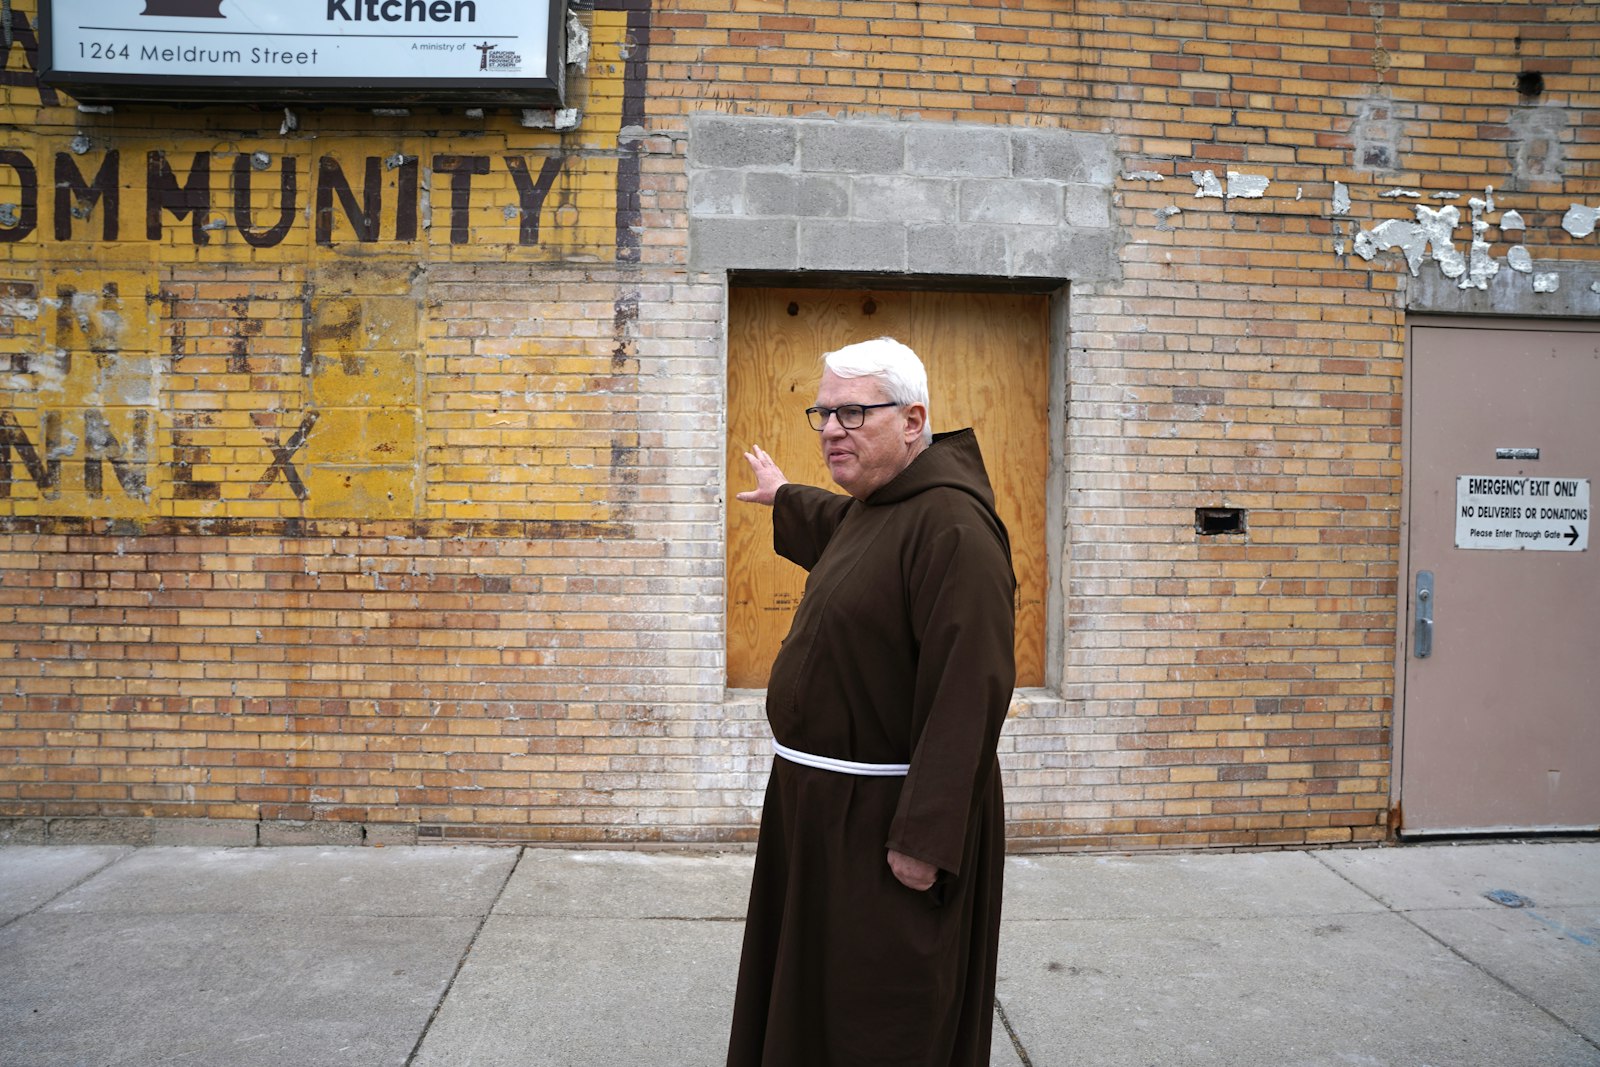 The stucco cladding that covered the Capuchin Soup Kitchen has been removed, revealing the original brick of the Capuchin Community Center Annex, which used to house the Capuchin Community Services Center. (Daniel Meloy | Detroit Catholic)